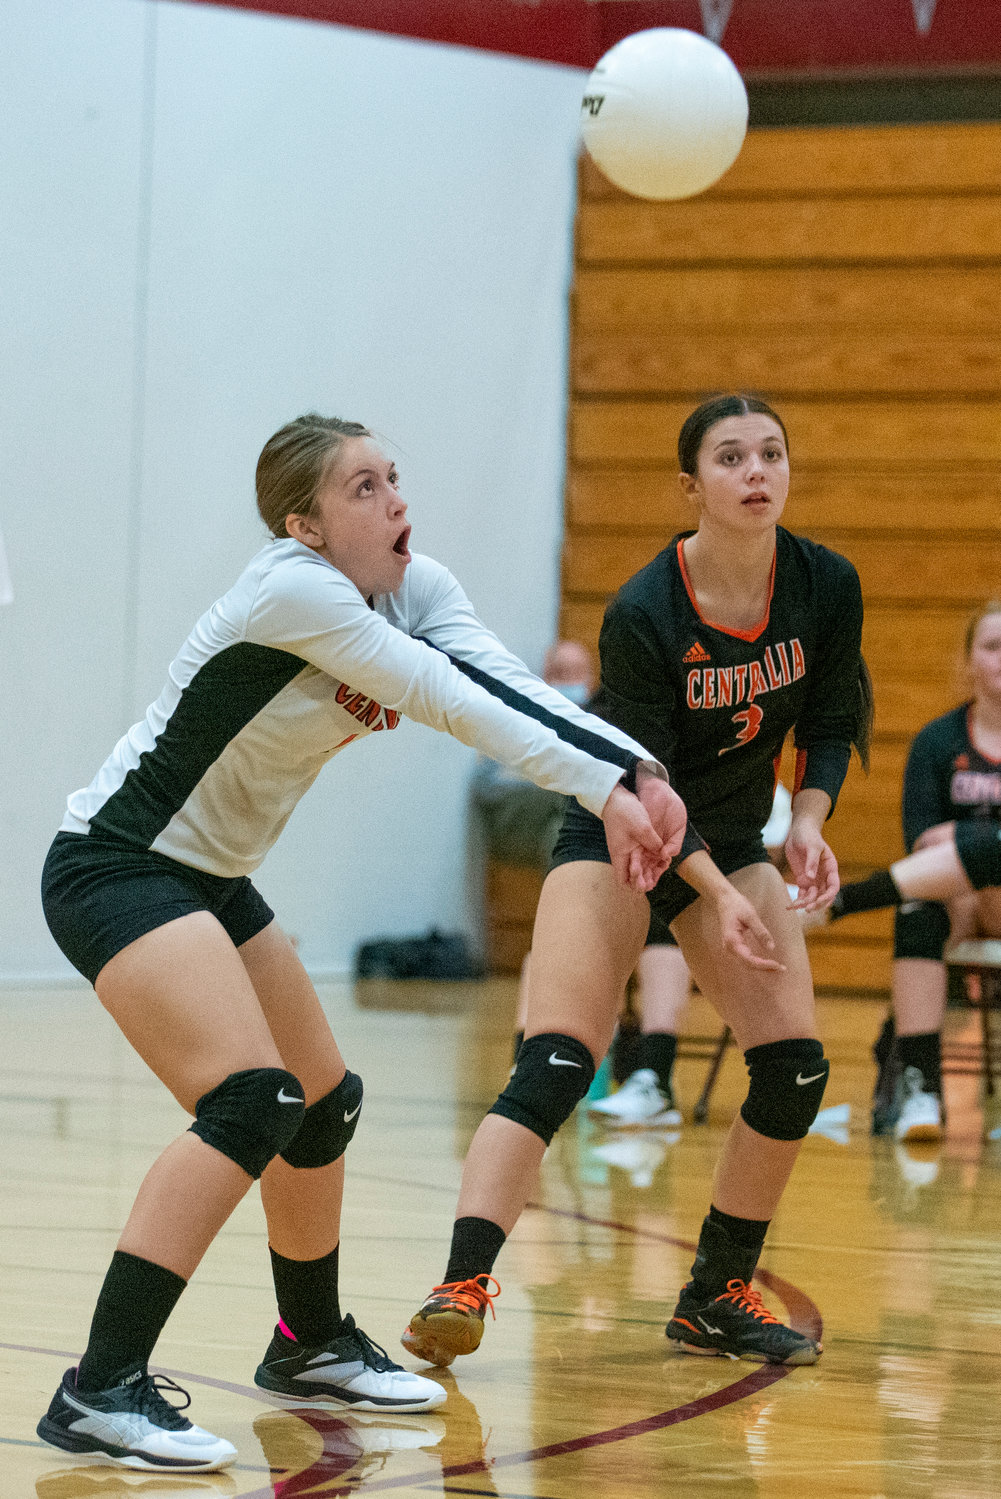 Centralia's Evie Rooklidge gets in front of a W.F. West serve while teammate Ella Orr (3) watches on Oct. 12, 2021.